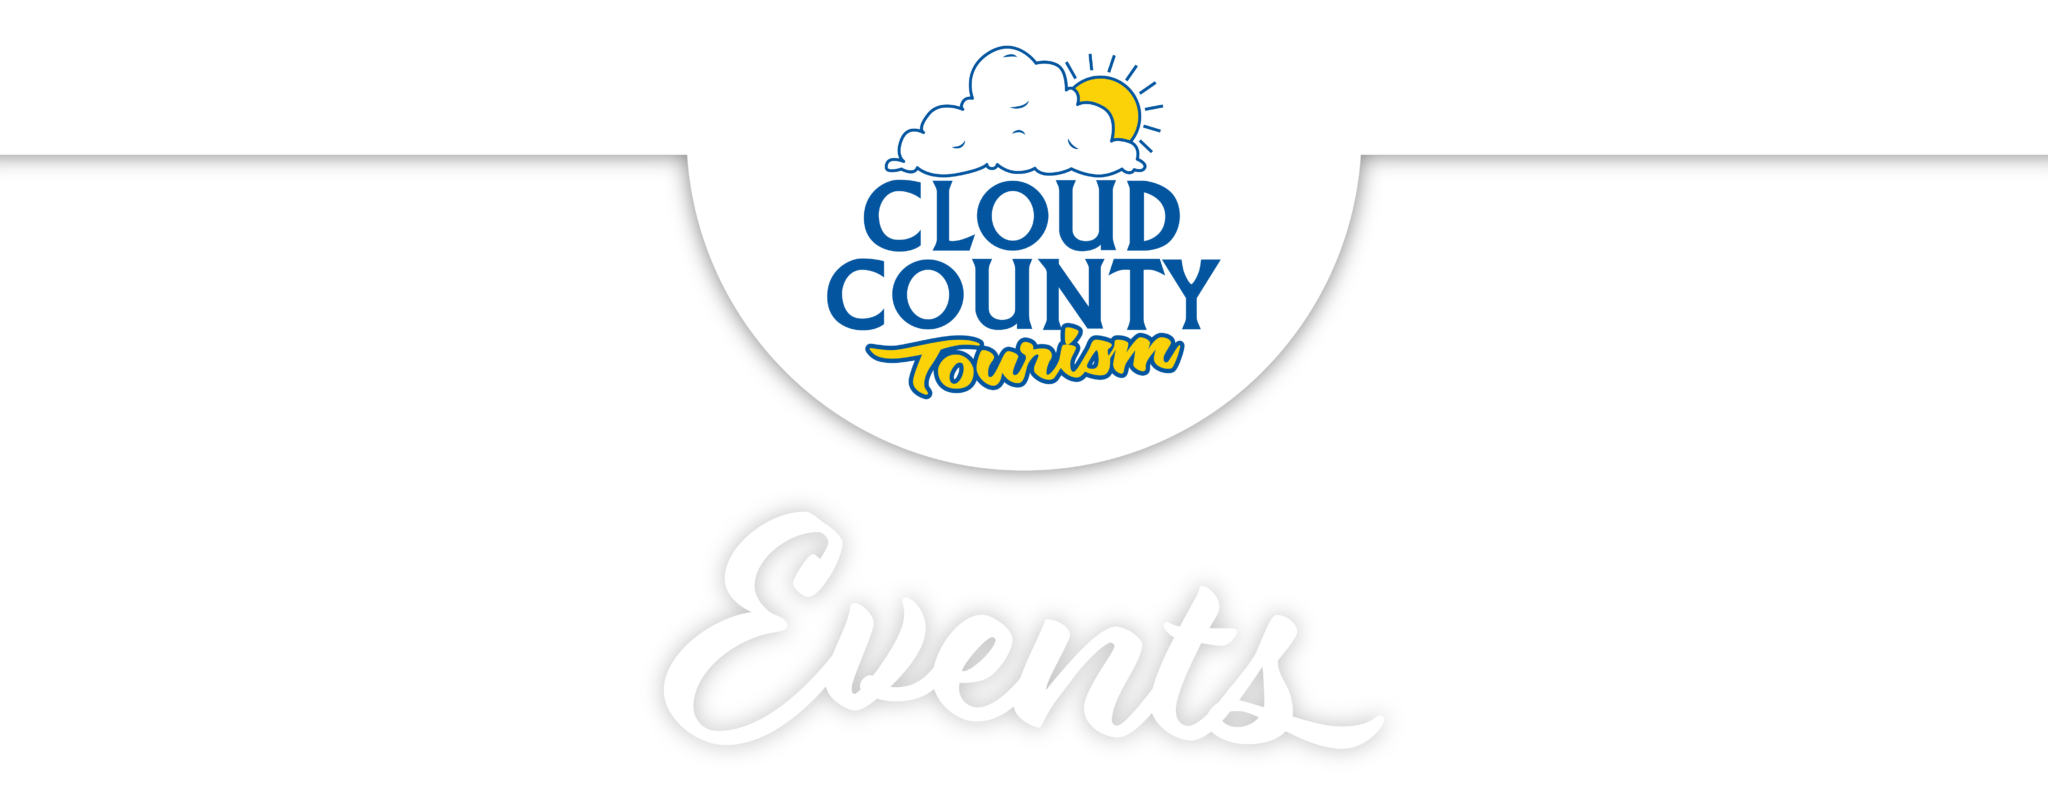 Events Cloud County Tourism We Have Fun to Offer